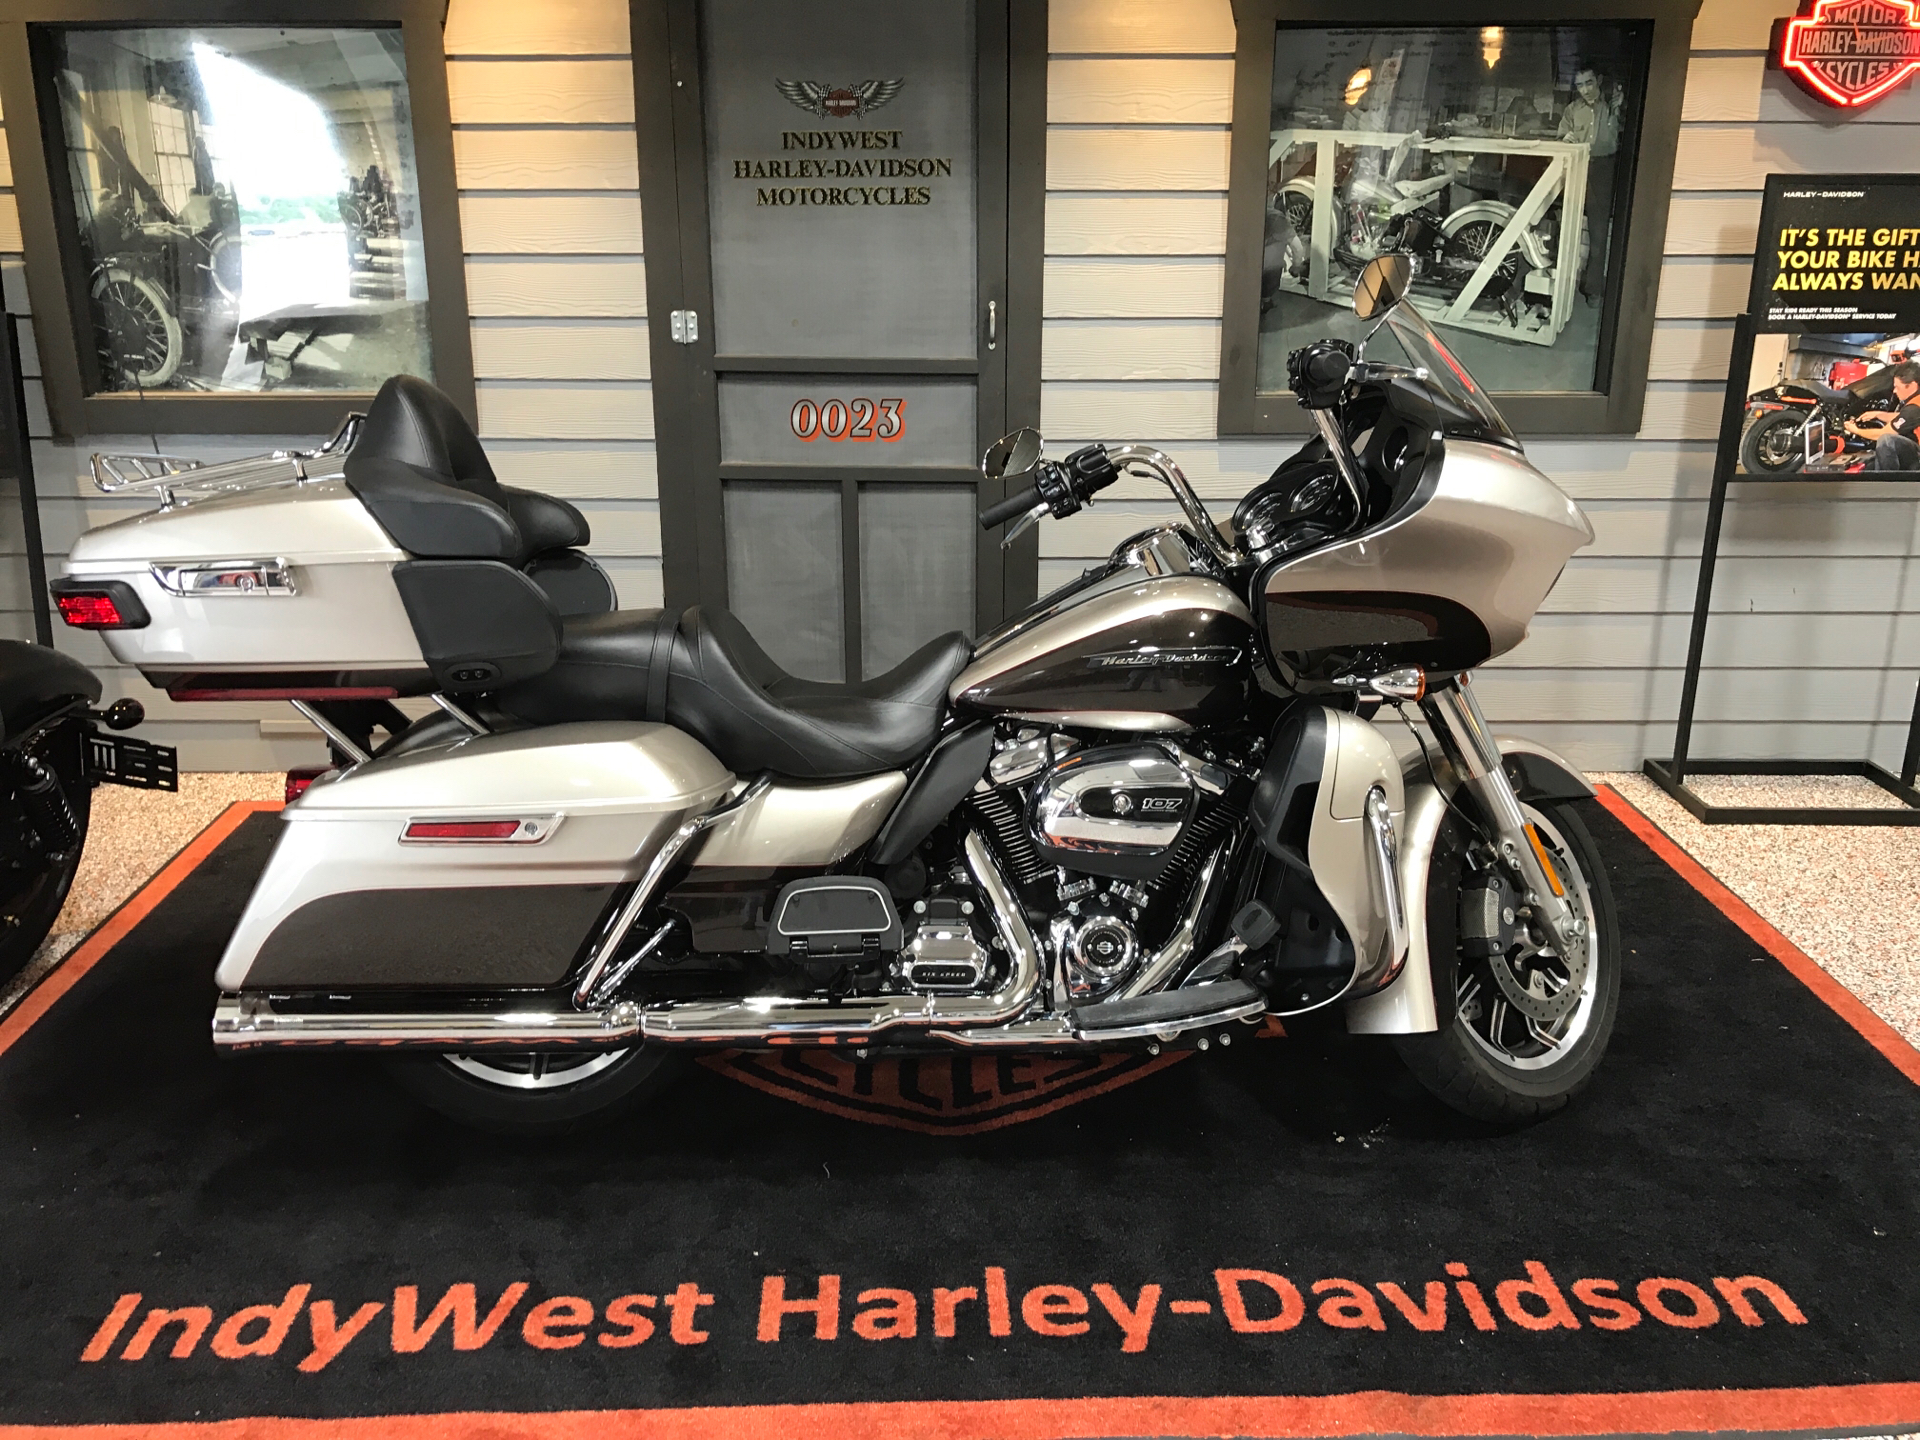 Used 2018 Harley Davidson Road Glide Ultra Silver Fortune Sumatra Brown Motorcycles In Plainfield In 676473